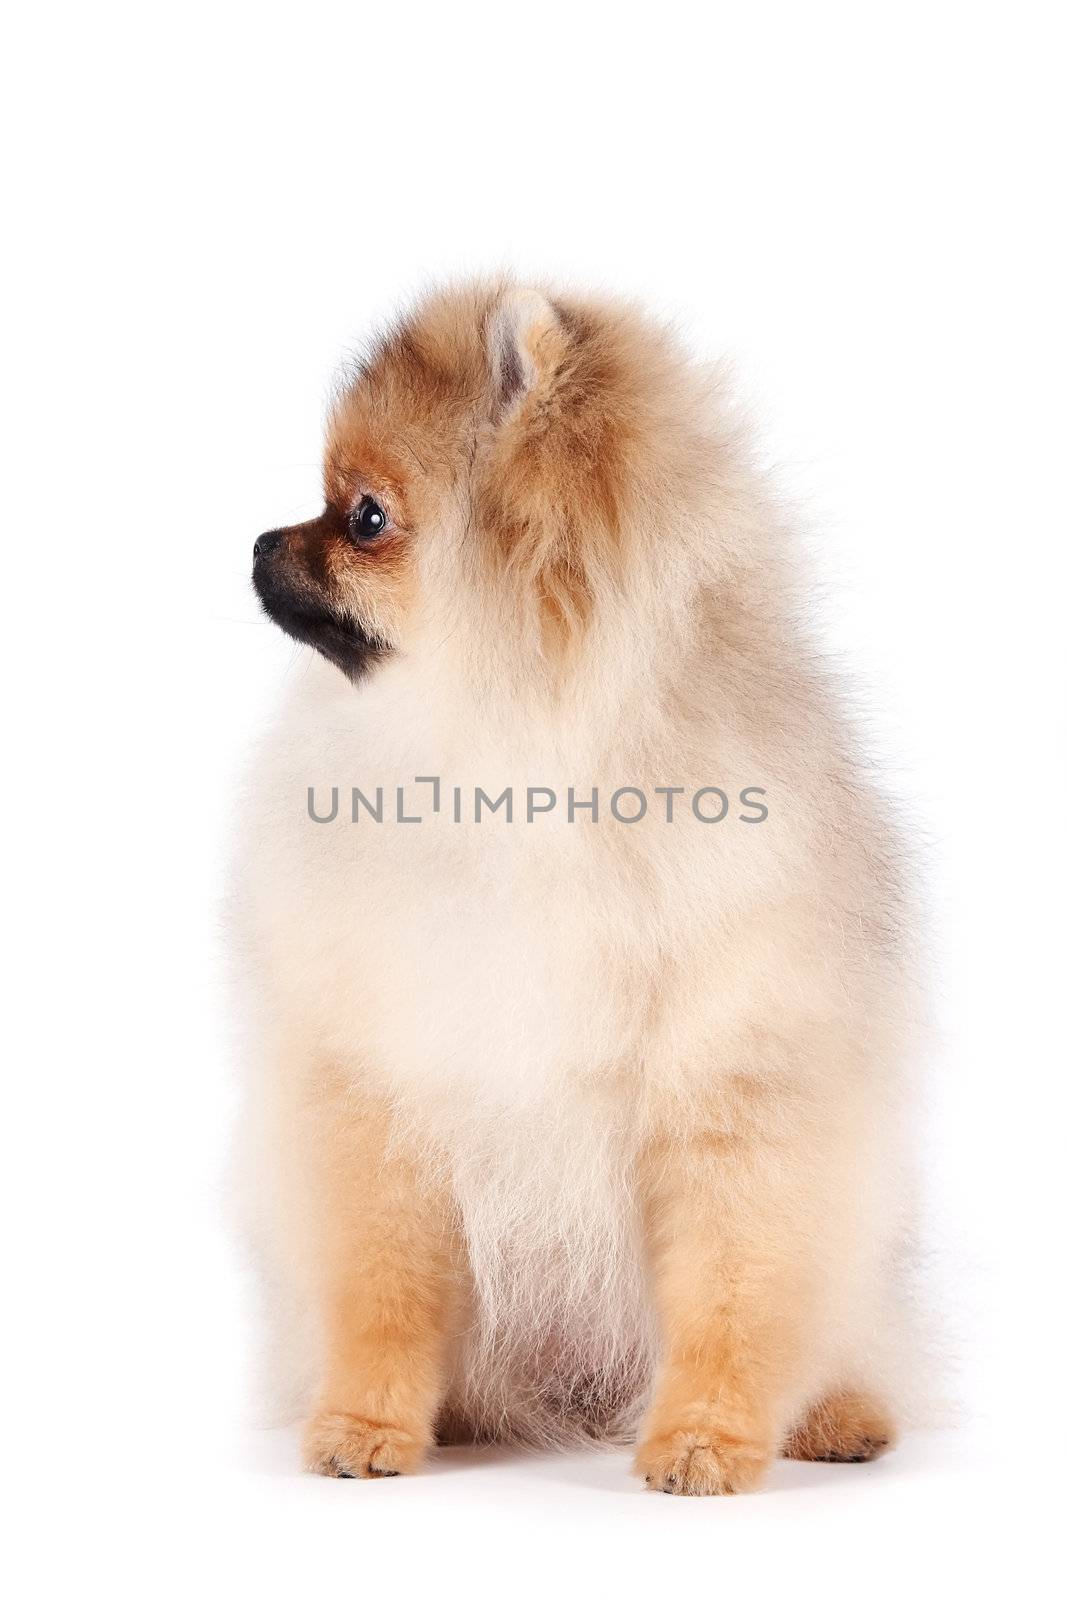 The puppy of a spitz-dog sits on a white background